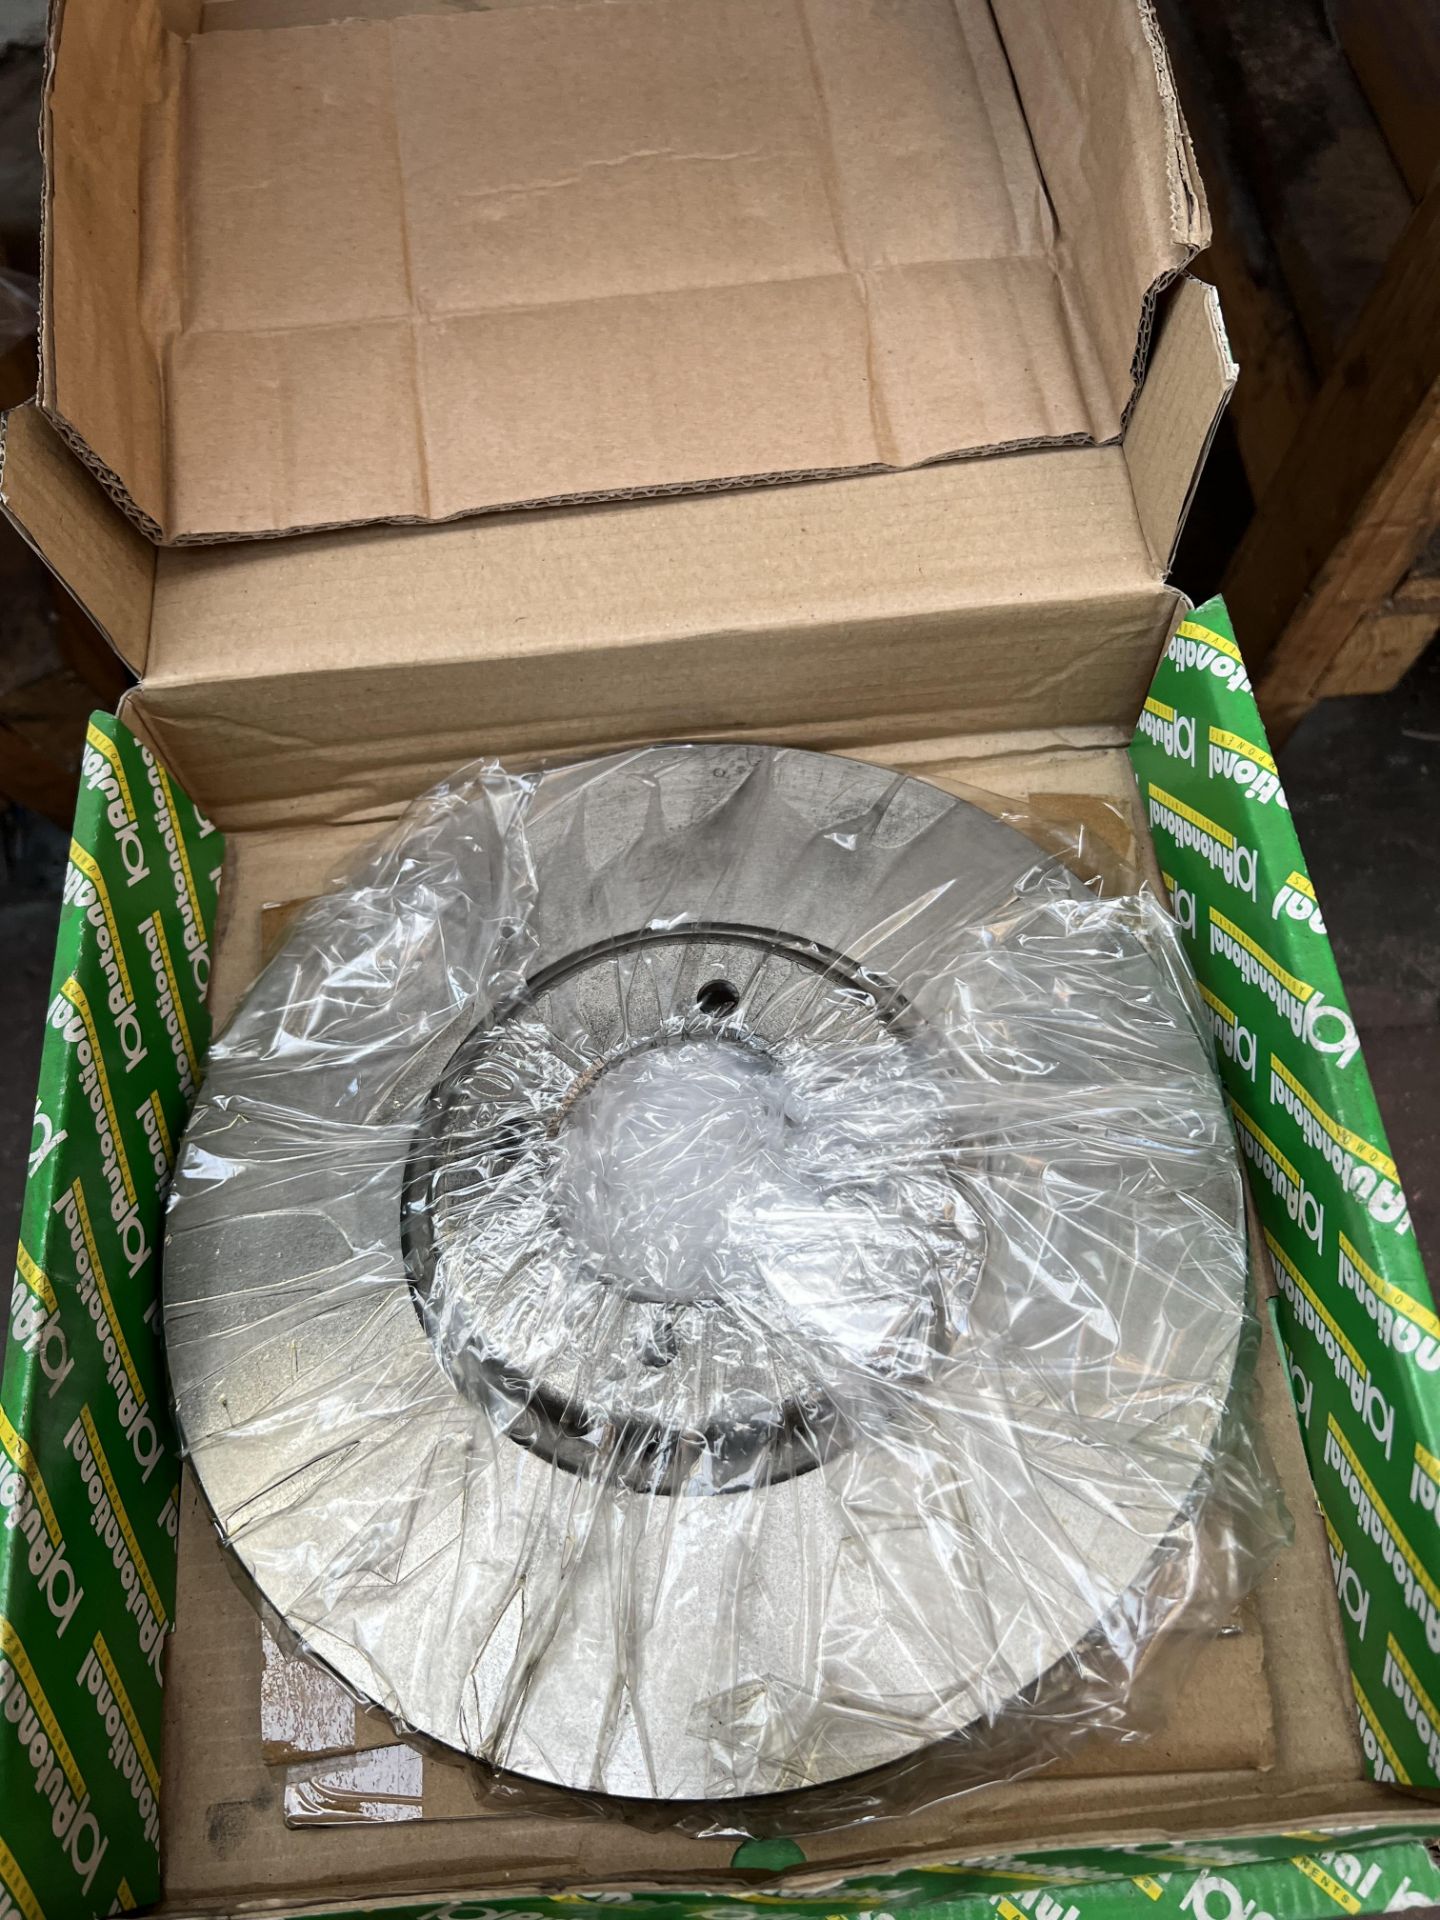 7: Boxed Autonational Front Brake Discs for Lotus Eclat 72-85, Eclat 2.2 82-85, Elite S1/S2 and - Image 3 of 3